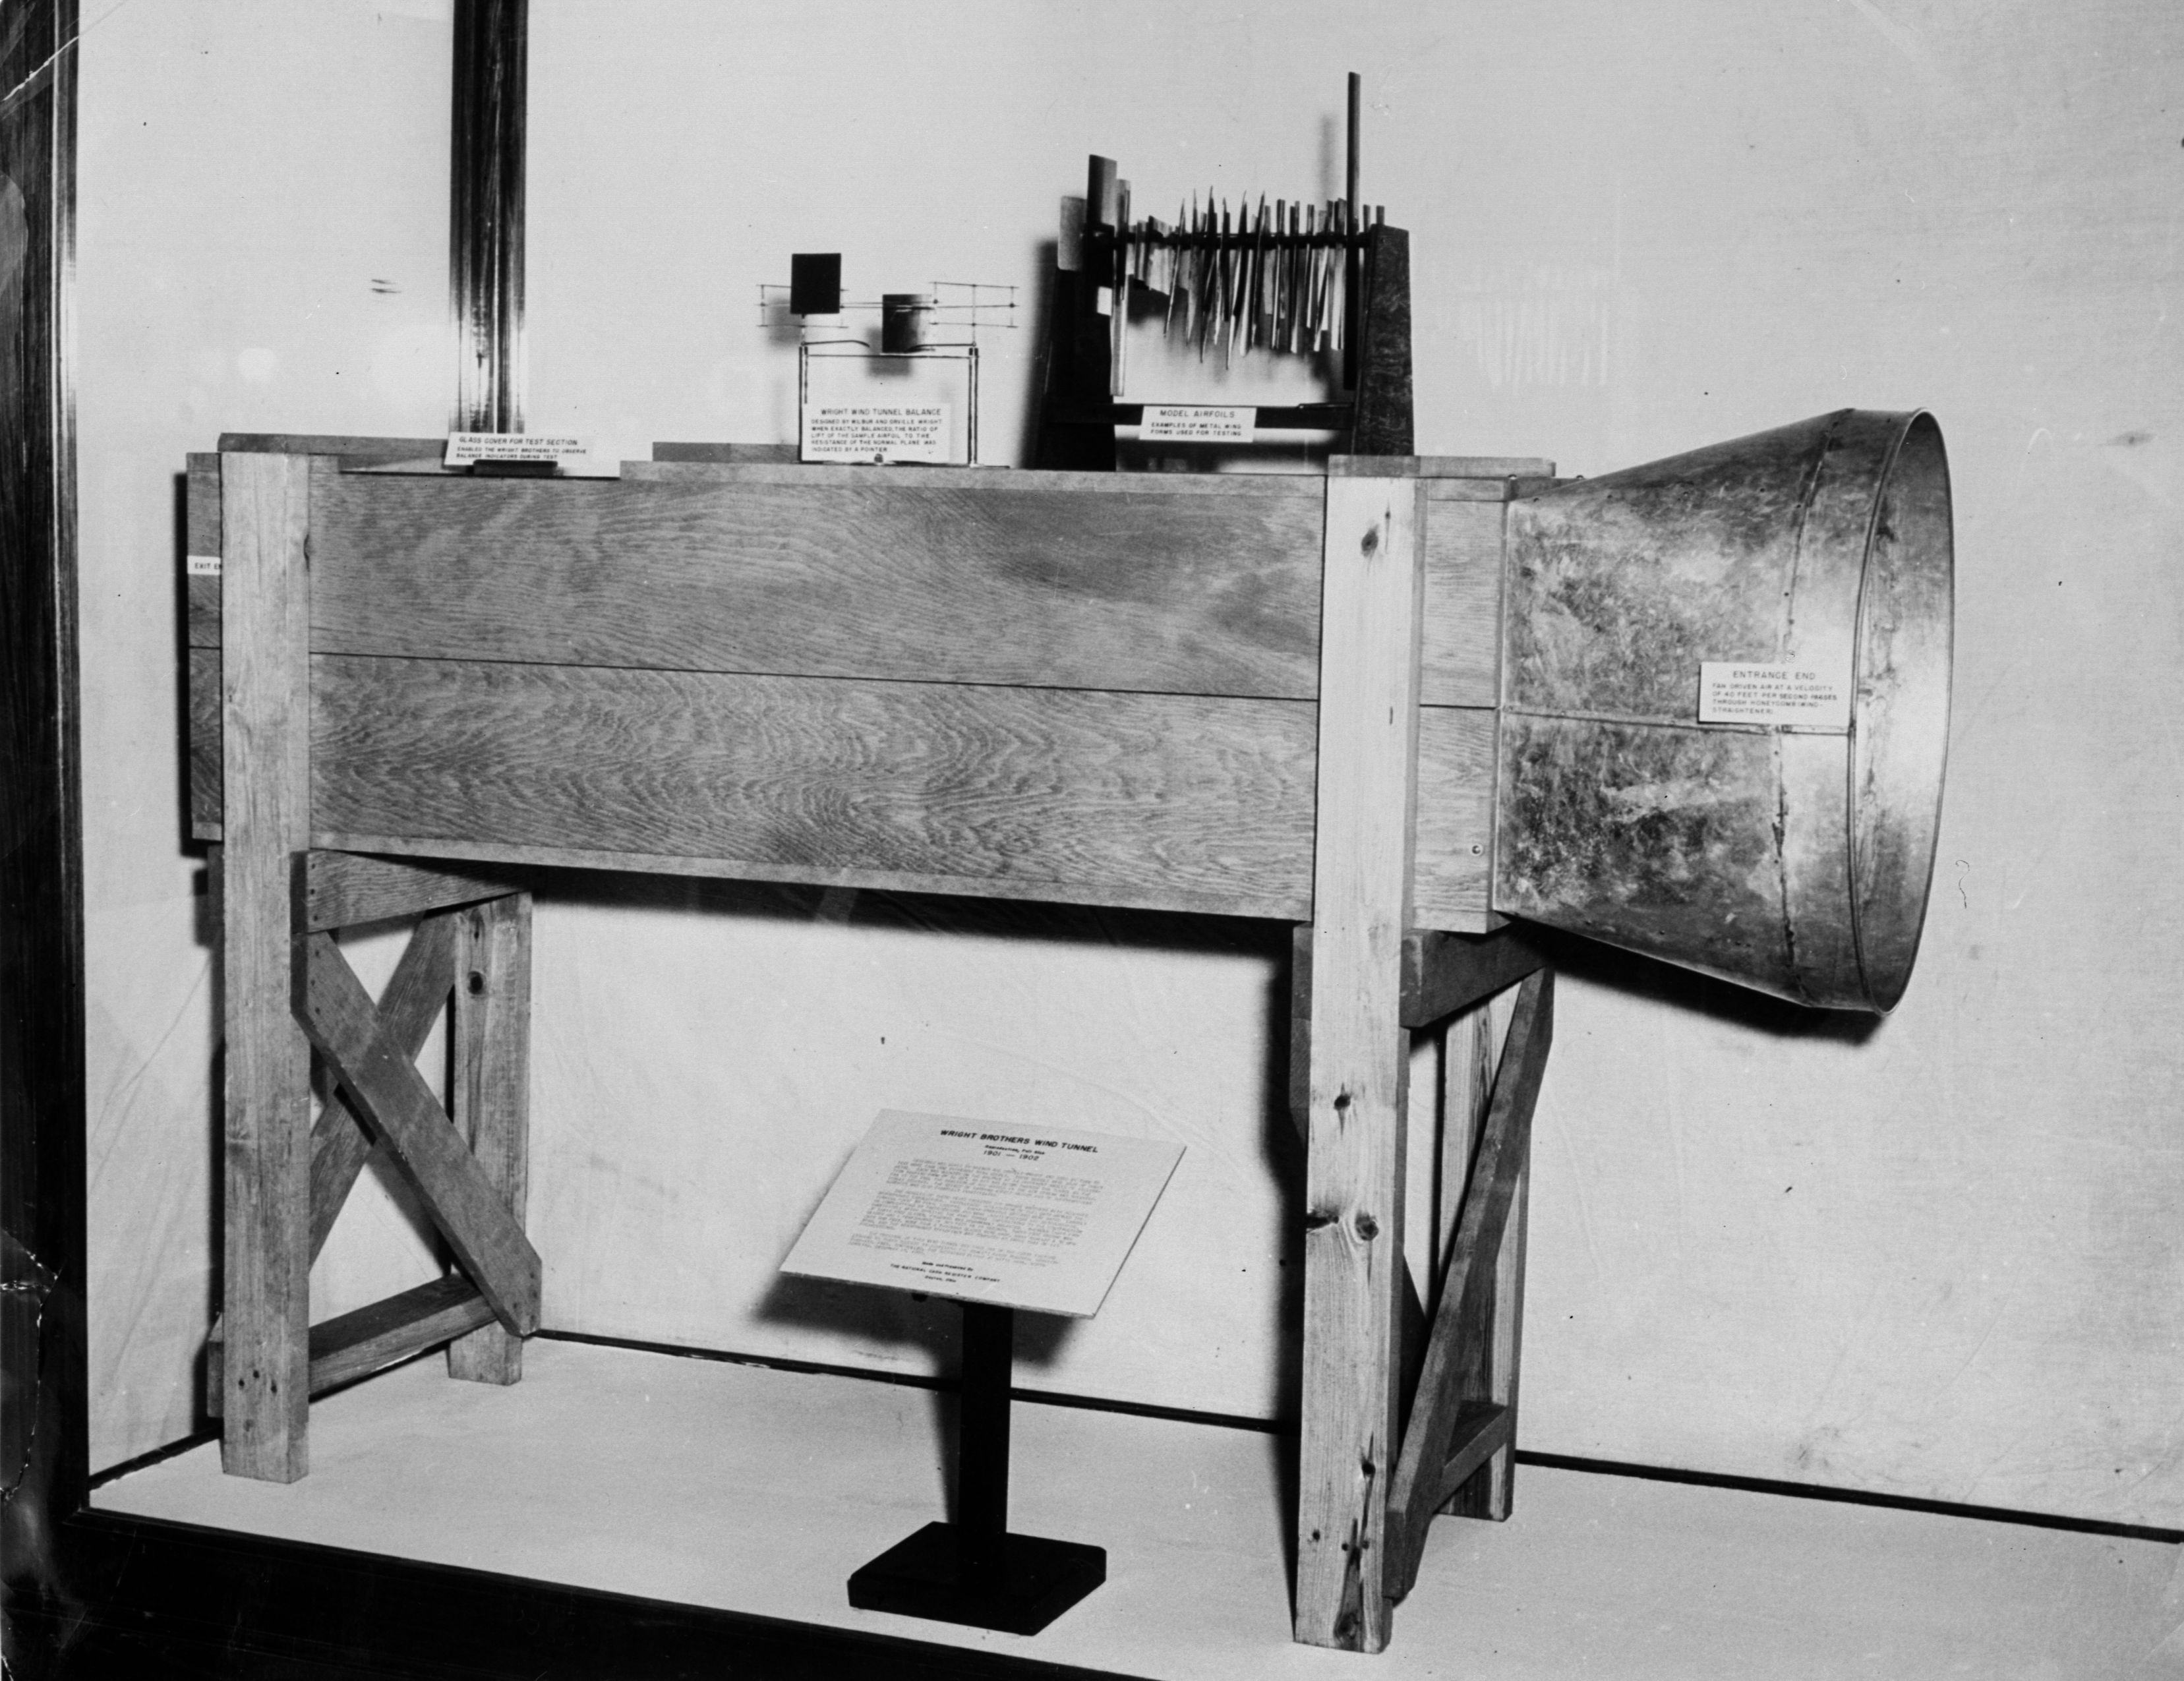 Wright Brothers' experimental wind tunnel